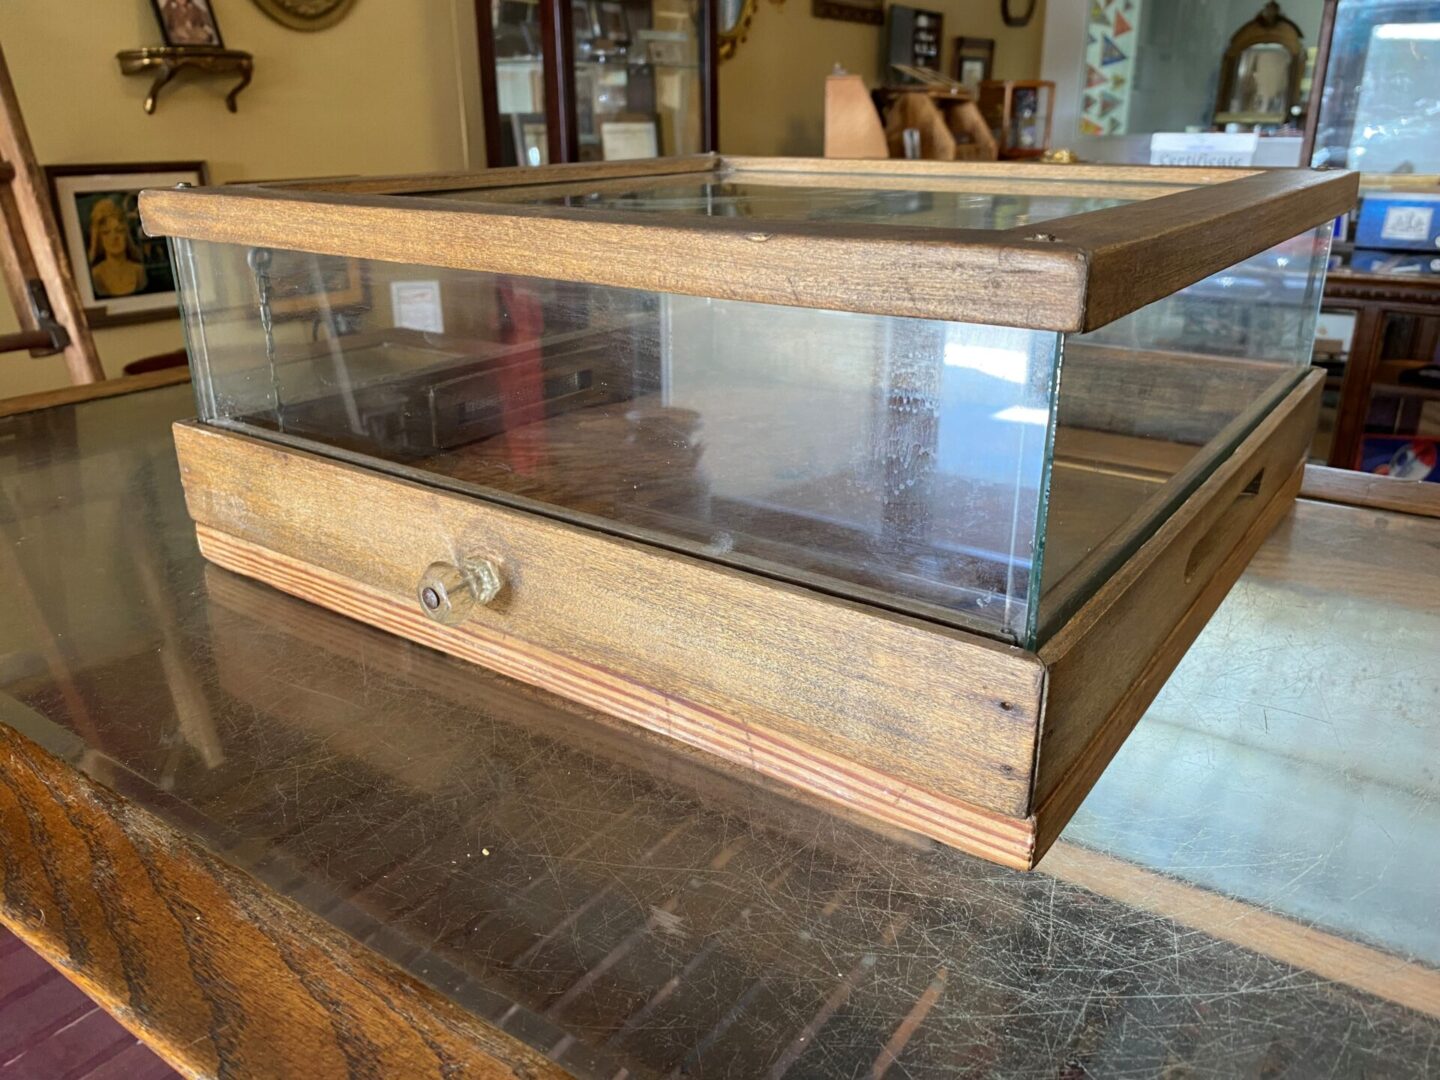 A wooden box with glass display top on a table.